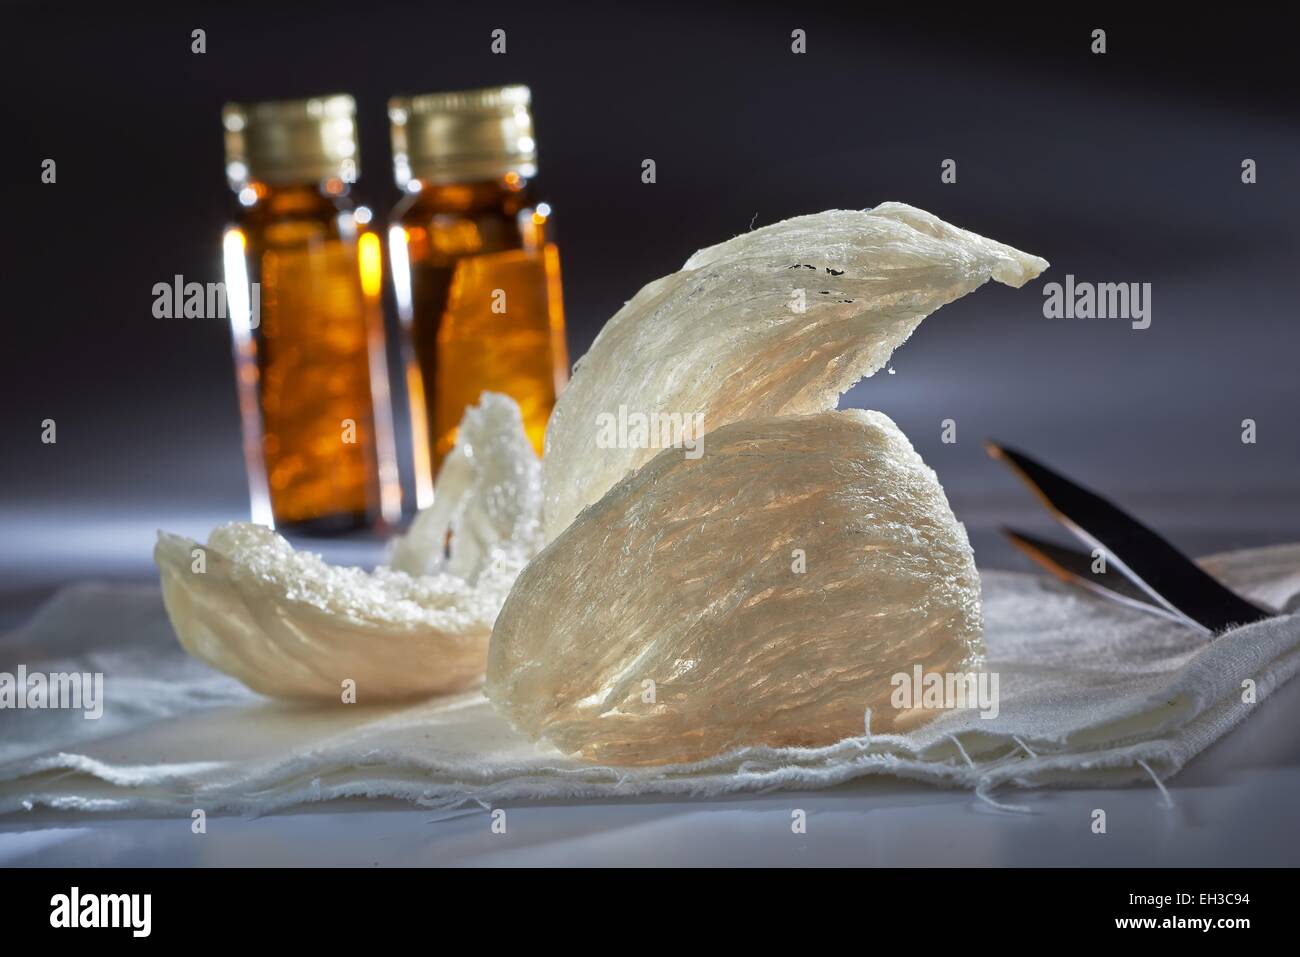 Edible birdnest with essence bottle and pincer in mood lighing shoot Stock Photo